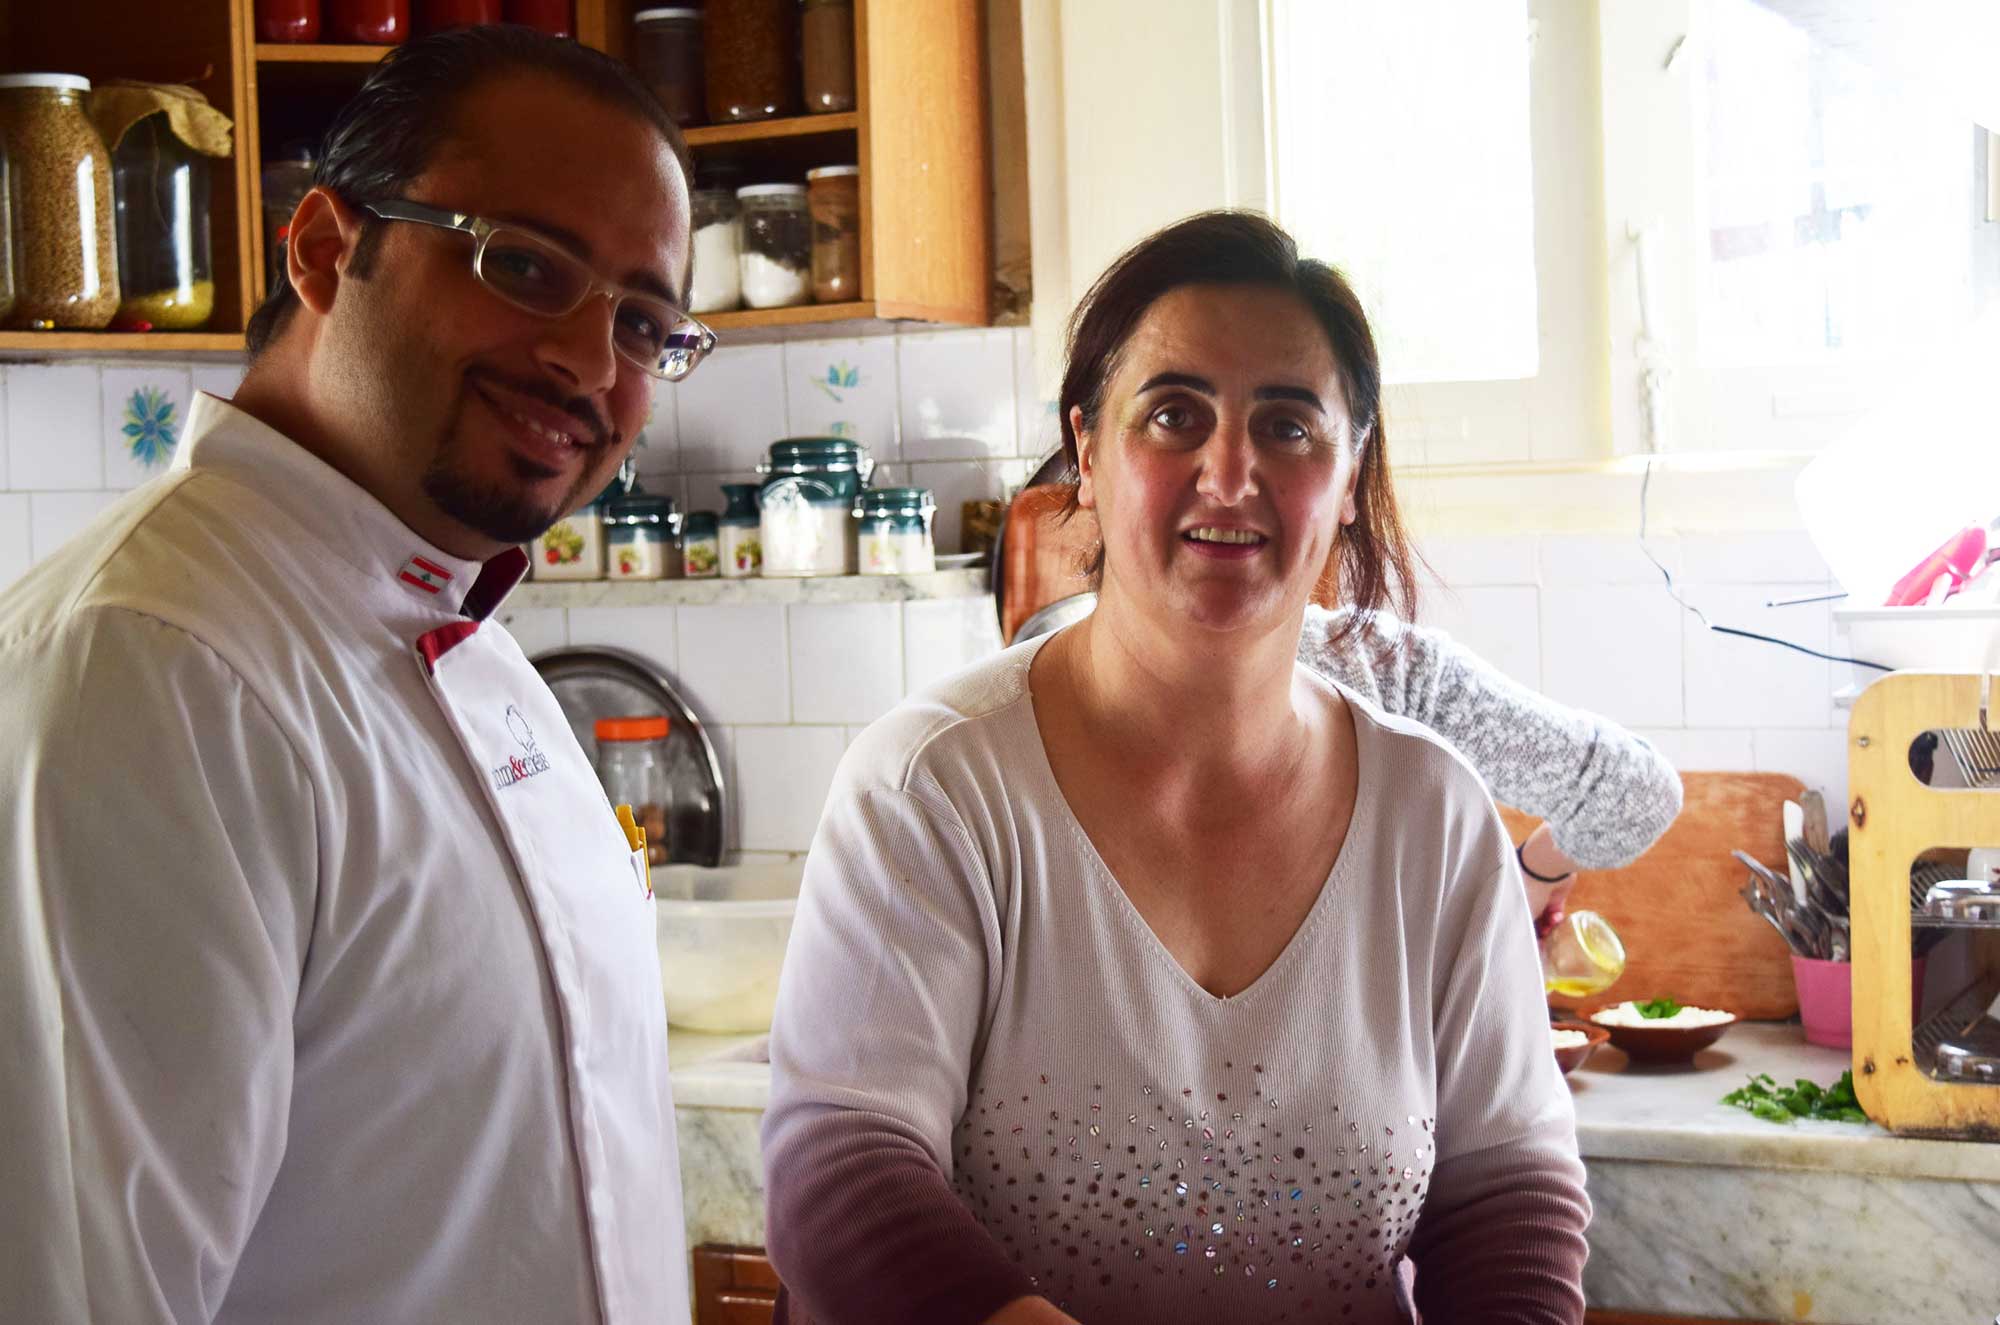 Chef Bawab gives some tips to guesthouse owner Wafaa Chalhoub, who runs the Diwan el Beik guesthouse in Douma.